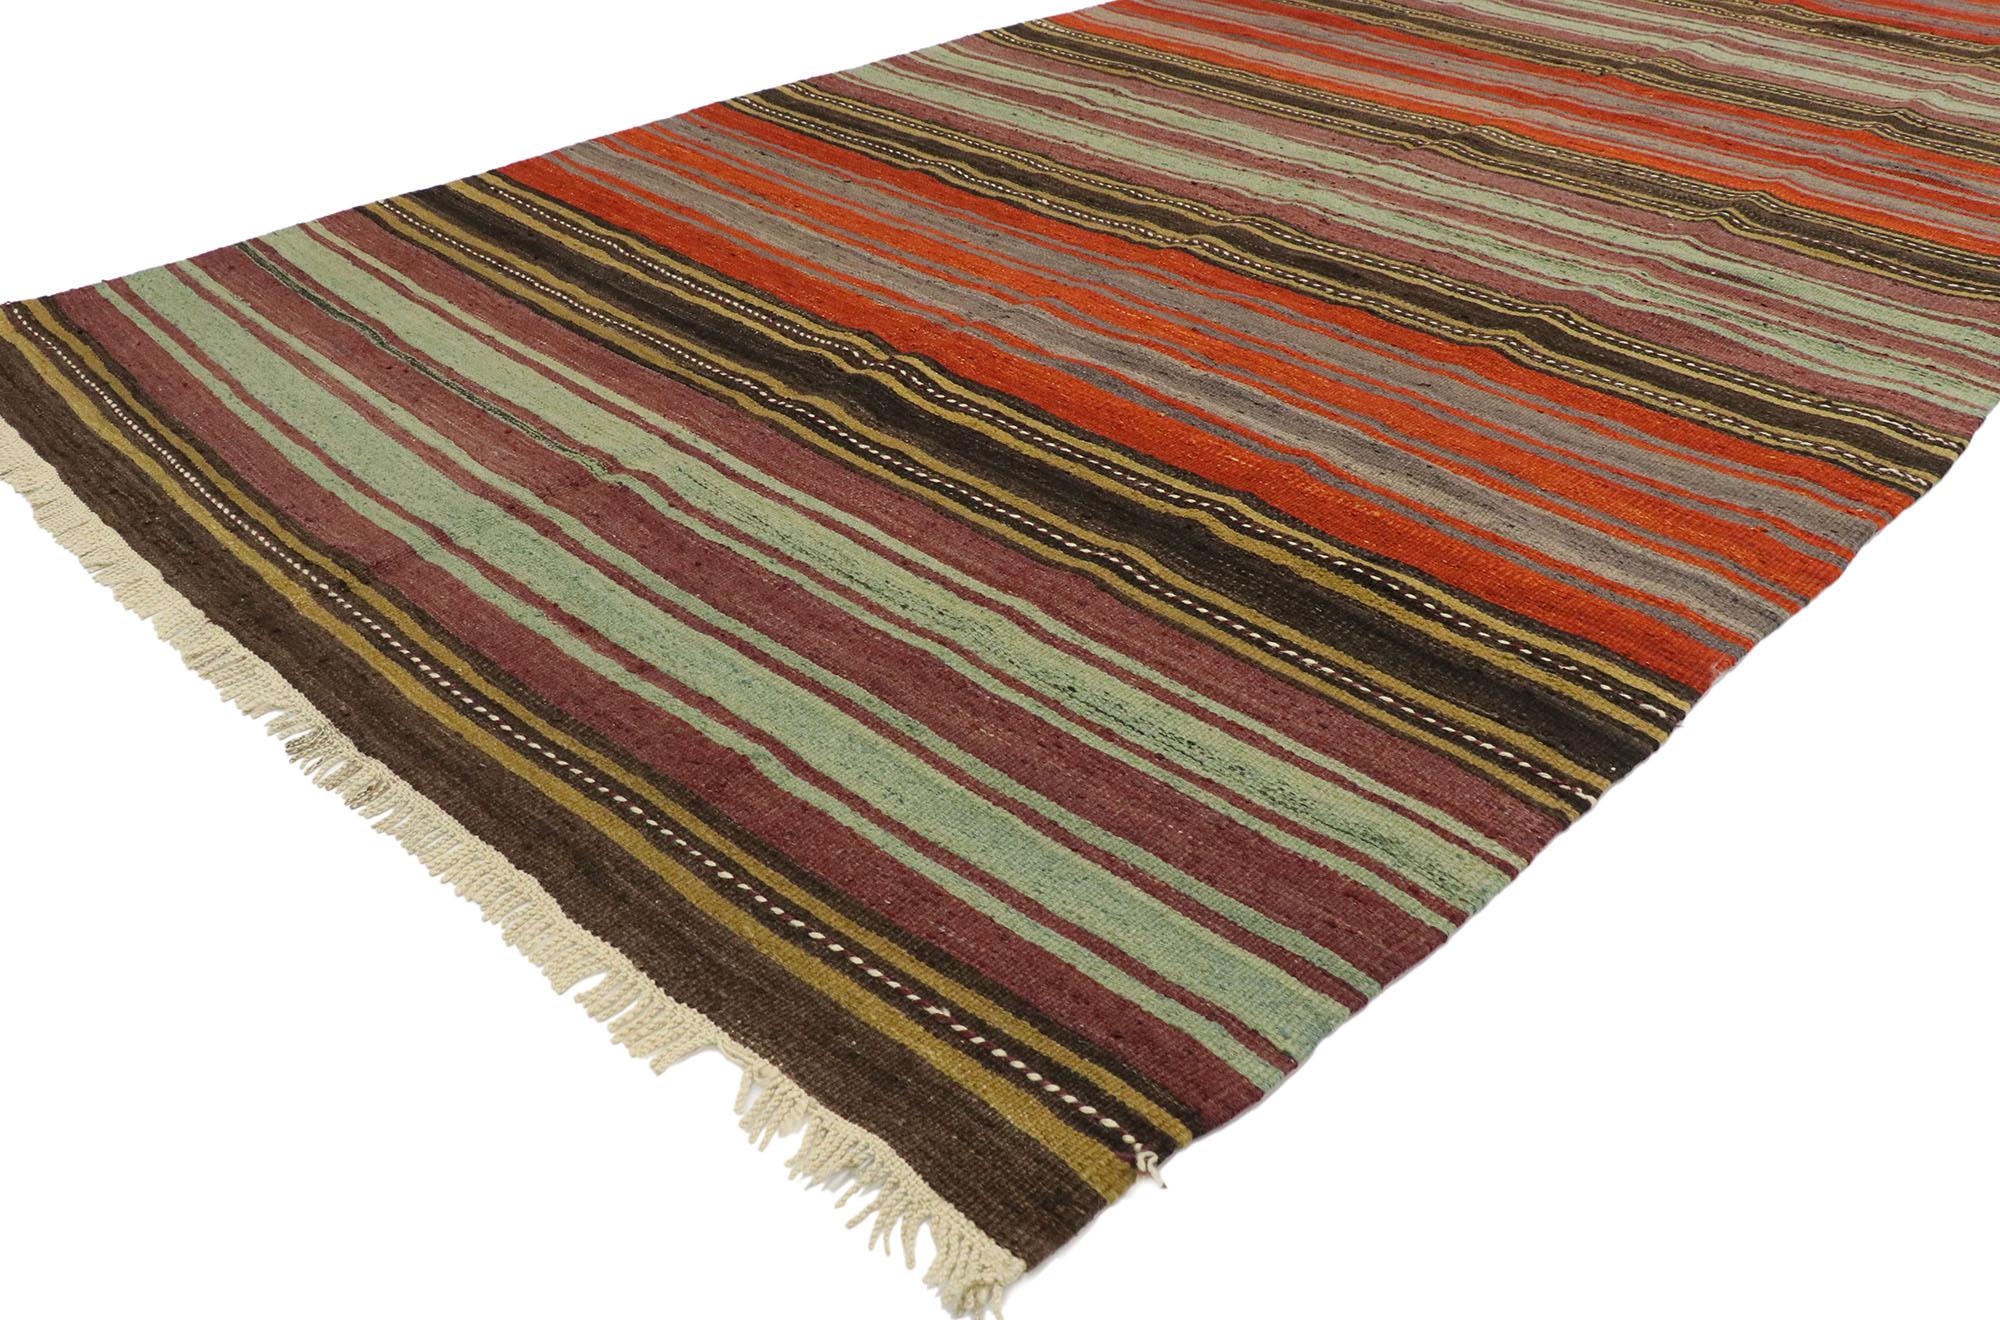 53114 vintage Turkish Striped Kilim rug. With its warm hues and rugged beauty, this handwoven wool striped kilim rug manages to meld contemporary, modern, and traditional design elements. The flat-weave kilim rug features a variety of colorful